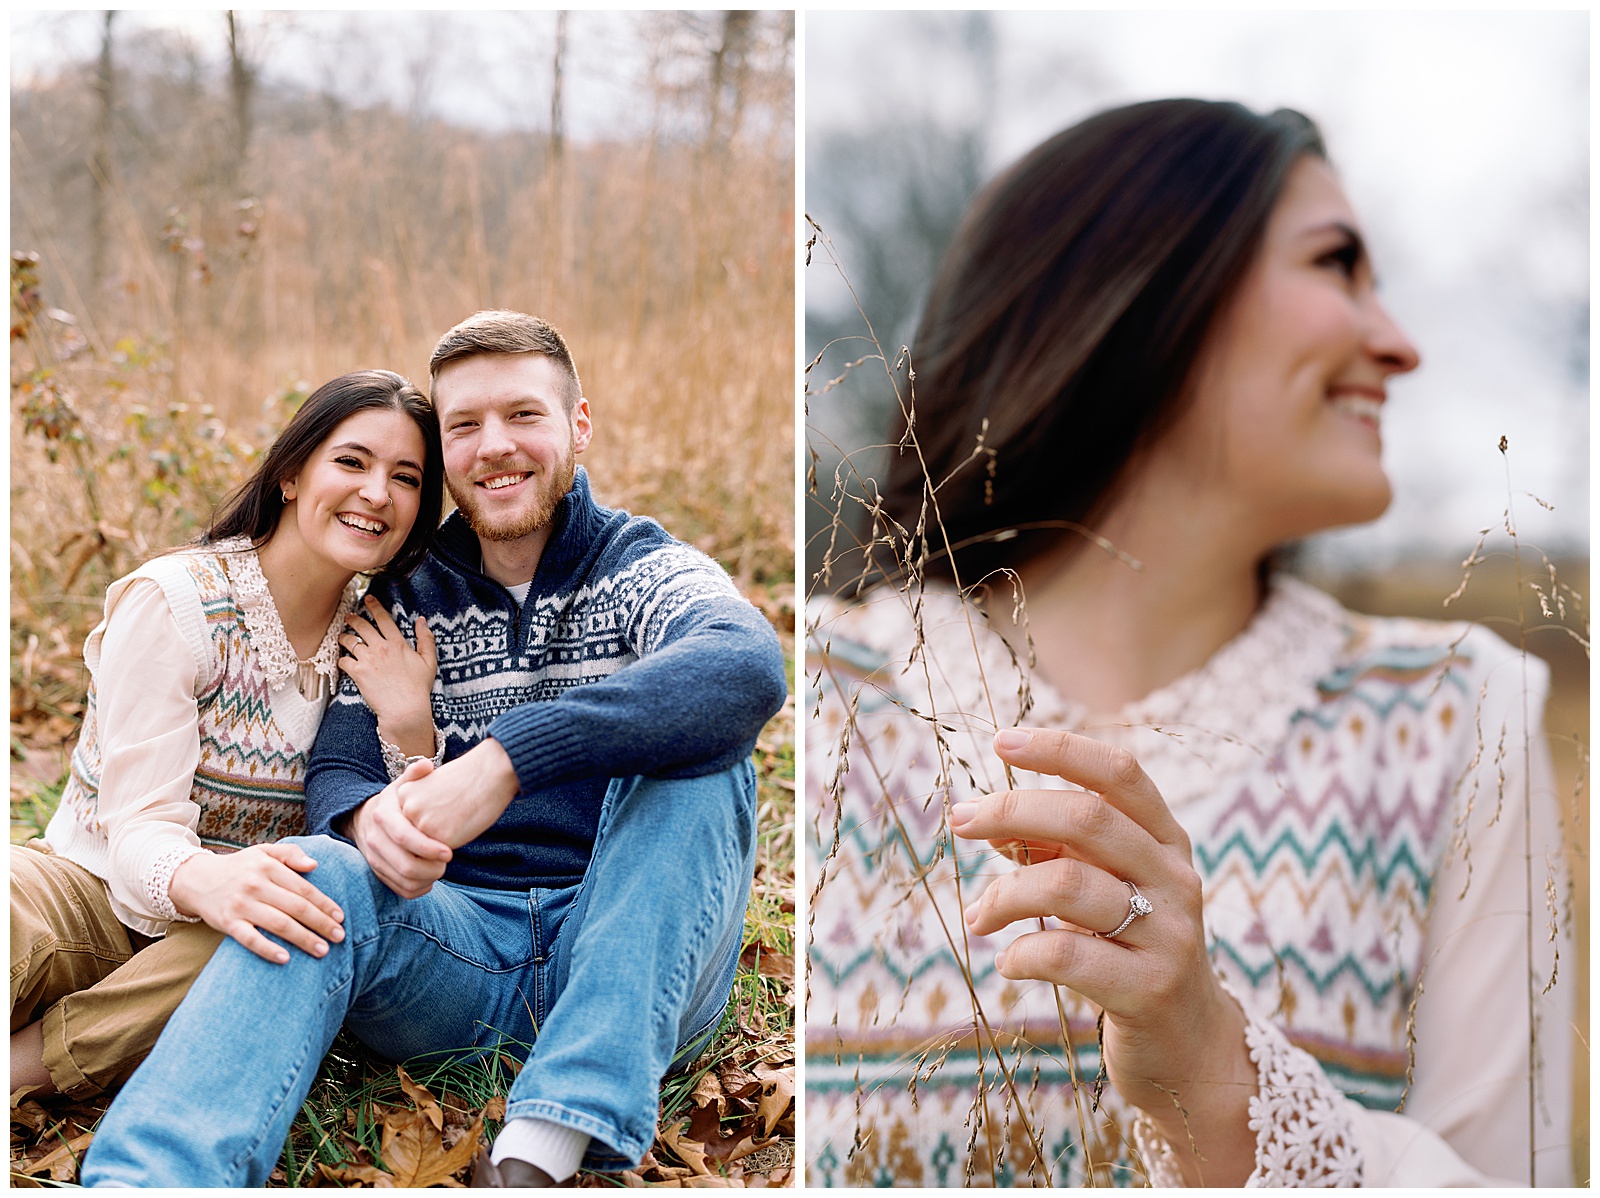 Guy and girl snuggled up in meadow at sunset in sweaters for their winter engagement session.